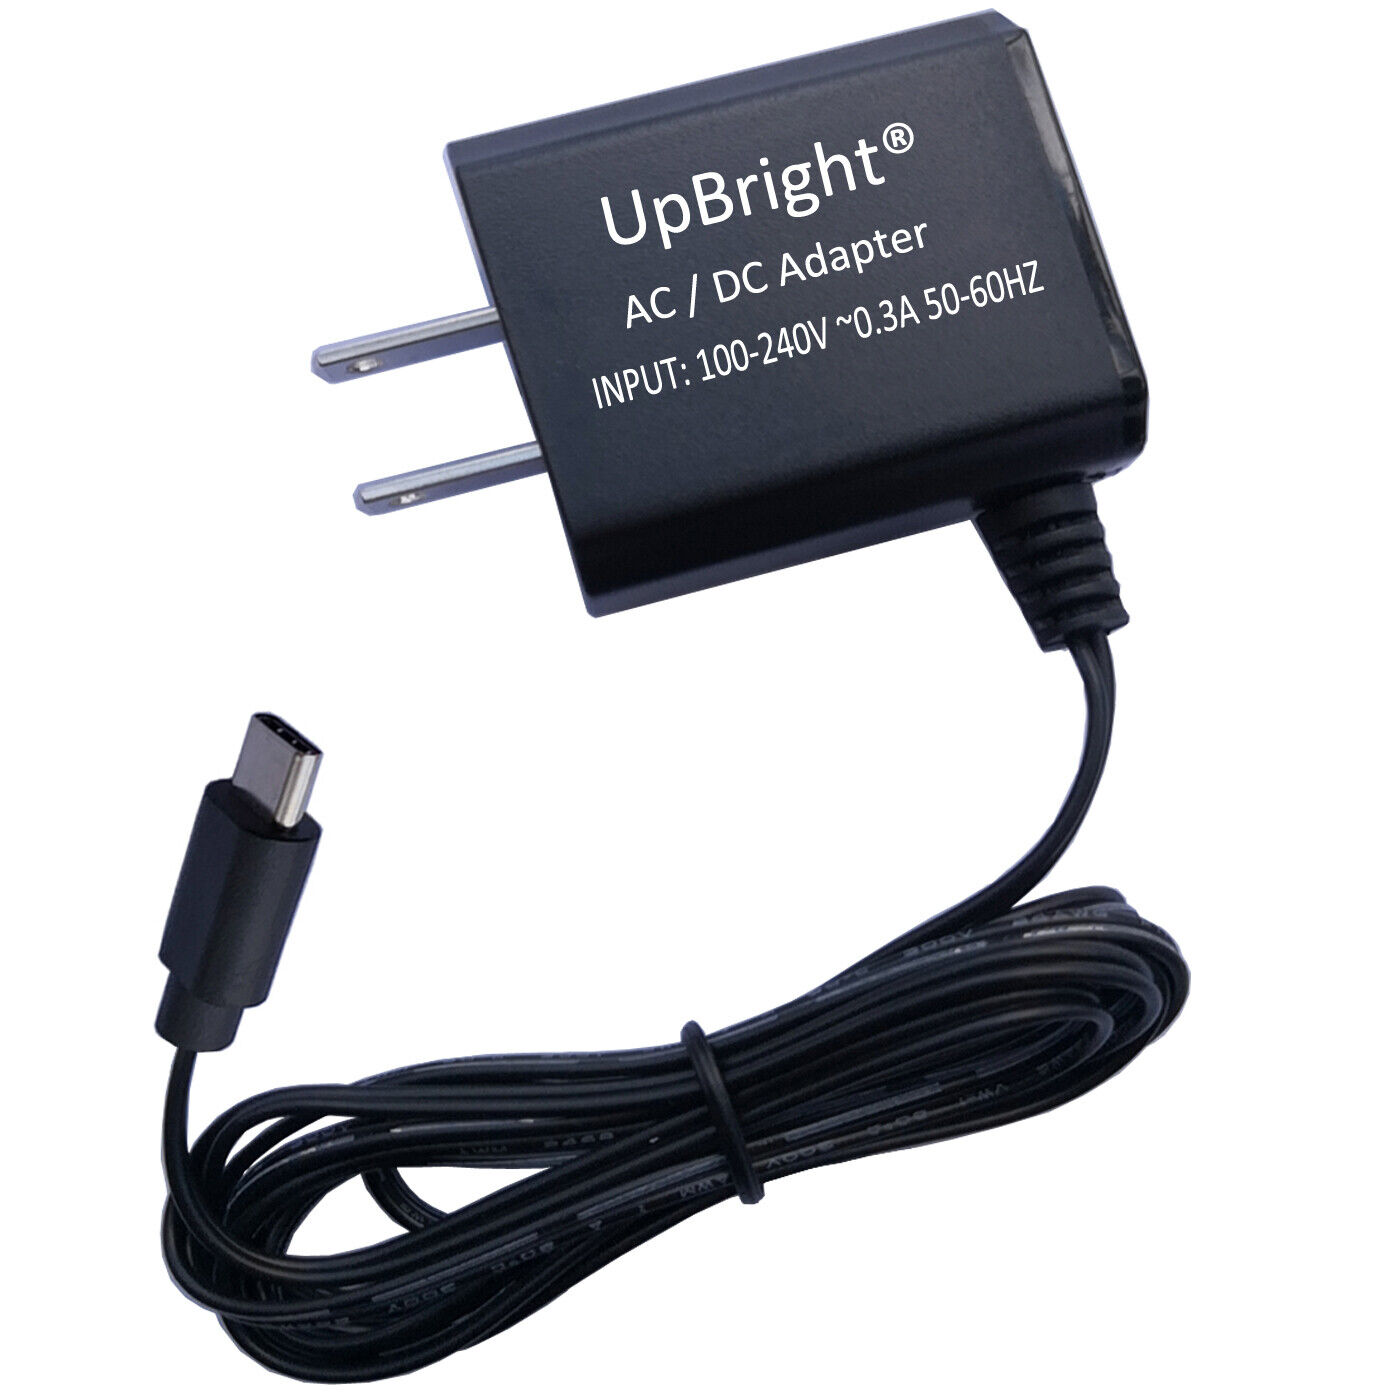 AC Adapter or Car or USB Cable For Goreit US-BG1915 US-G2800 US-G1695 ‎‎US-G9322